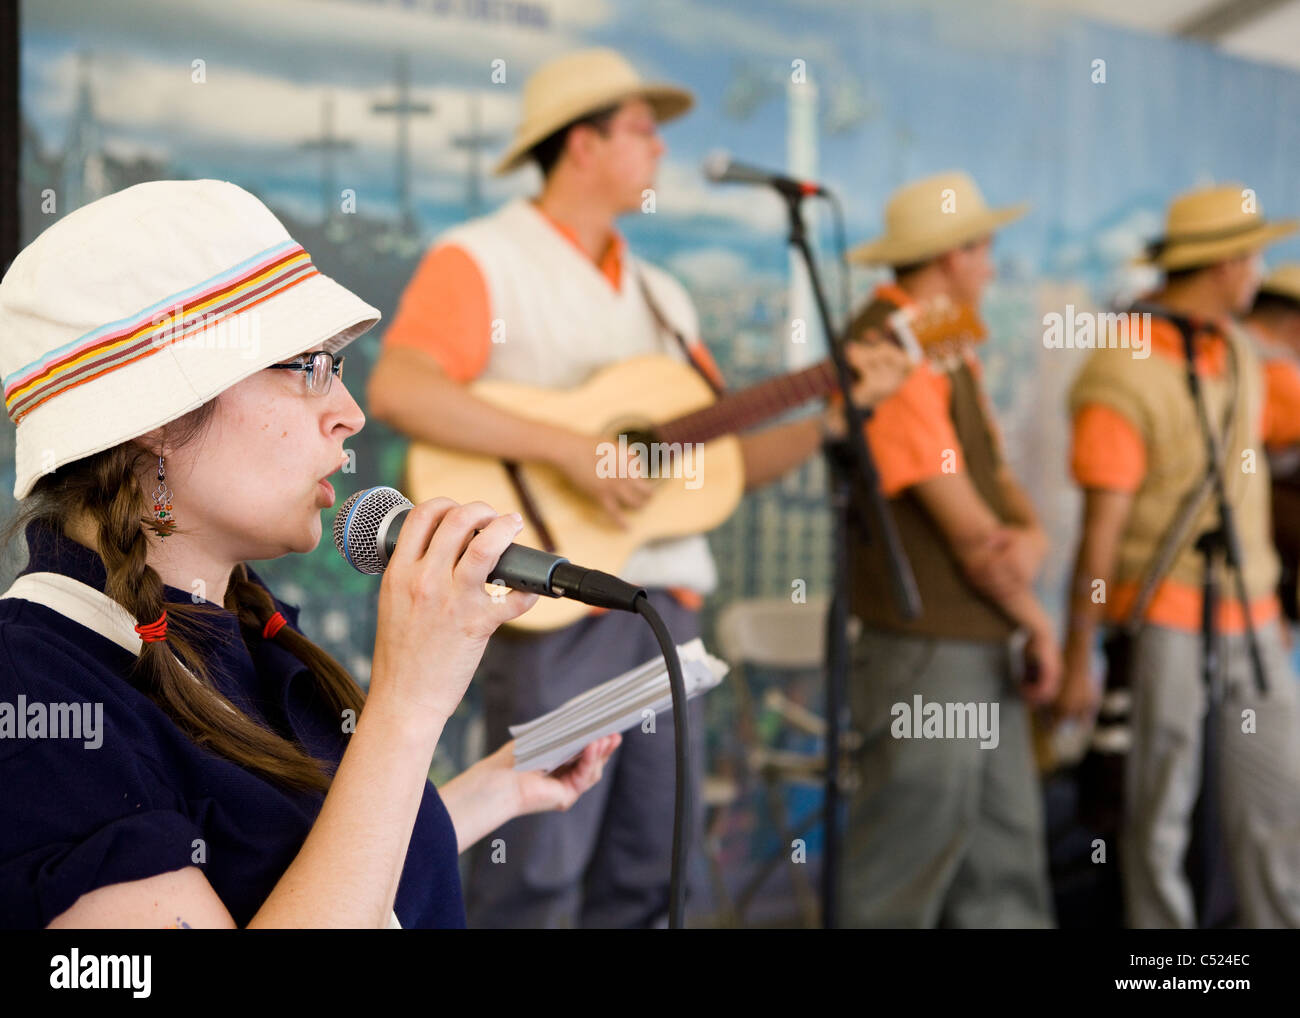 Colombian folk music band on stage Stock Photo